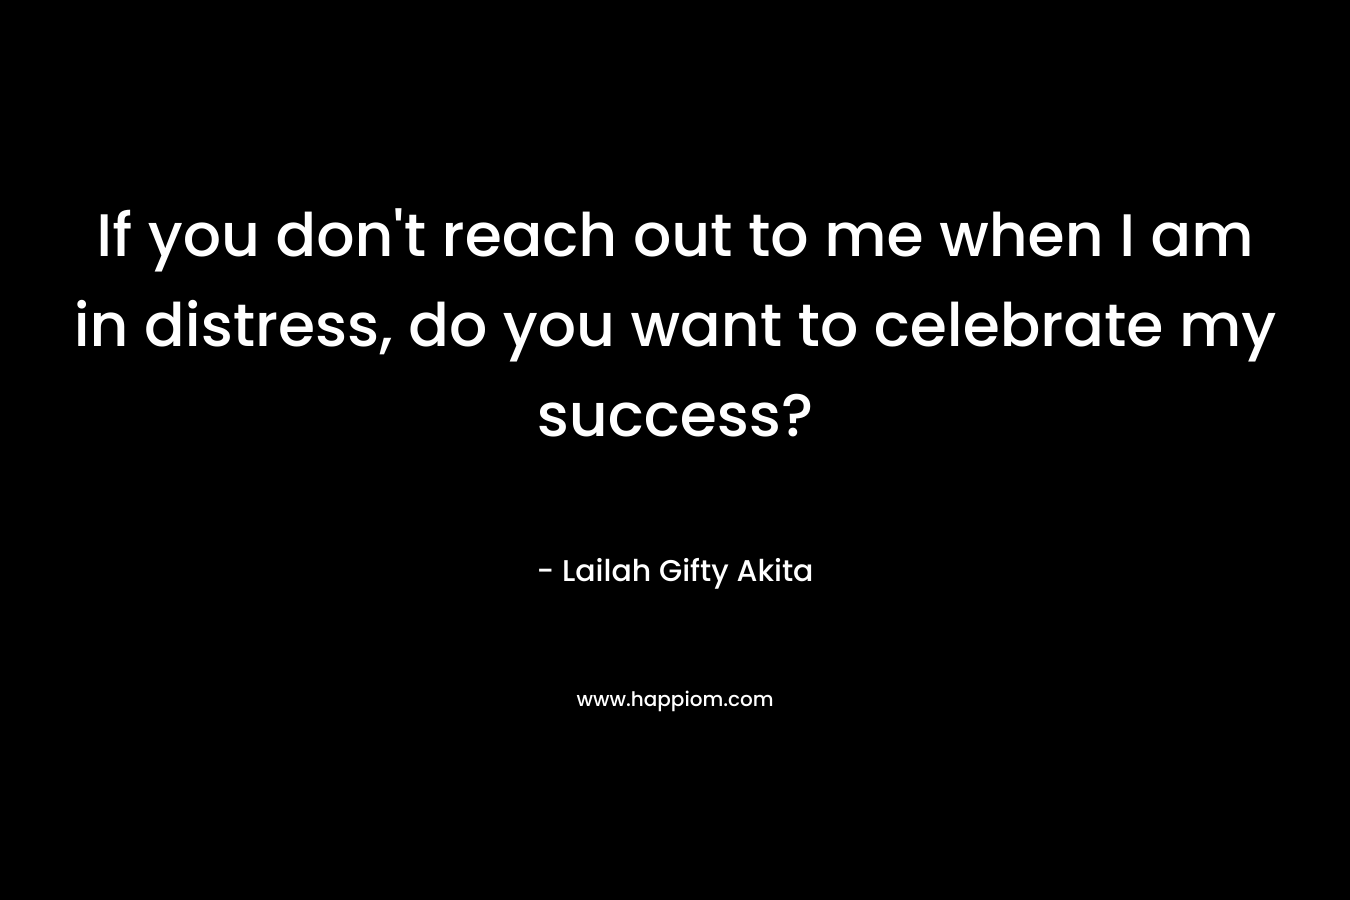 If you don't reach out to me when I am in distress, do you want to celebrate my success?